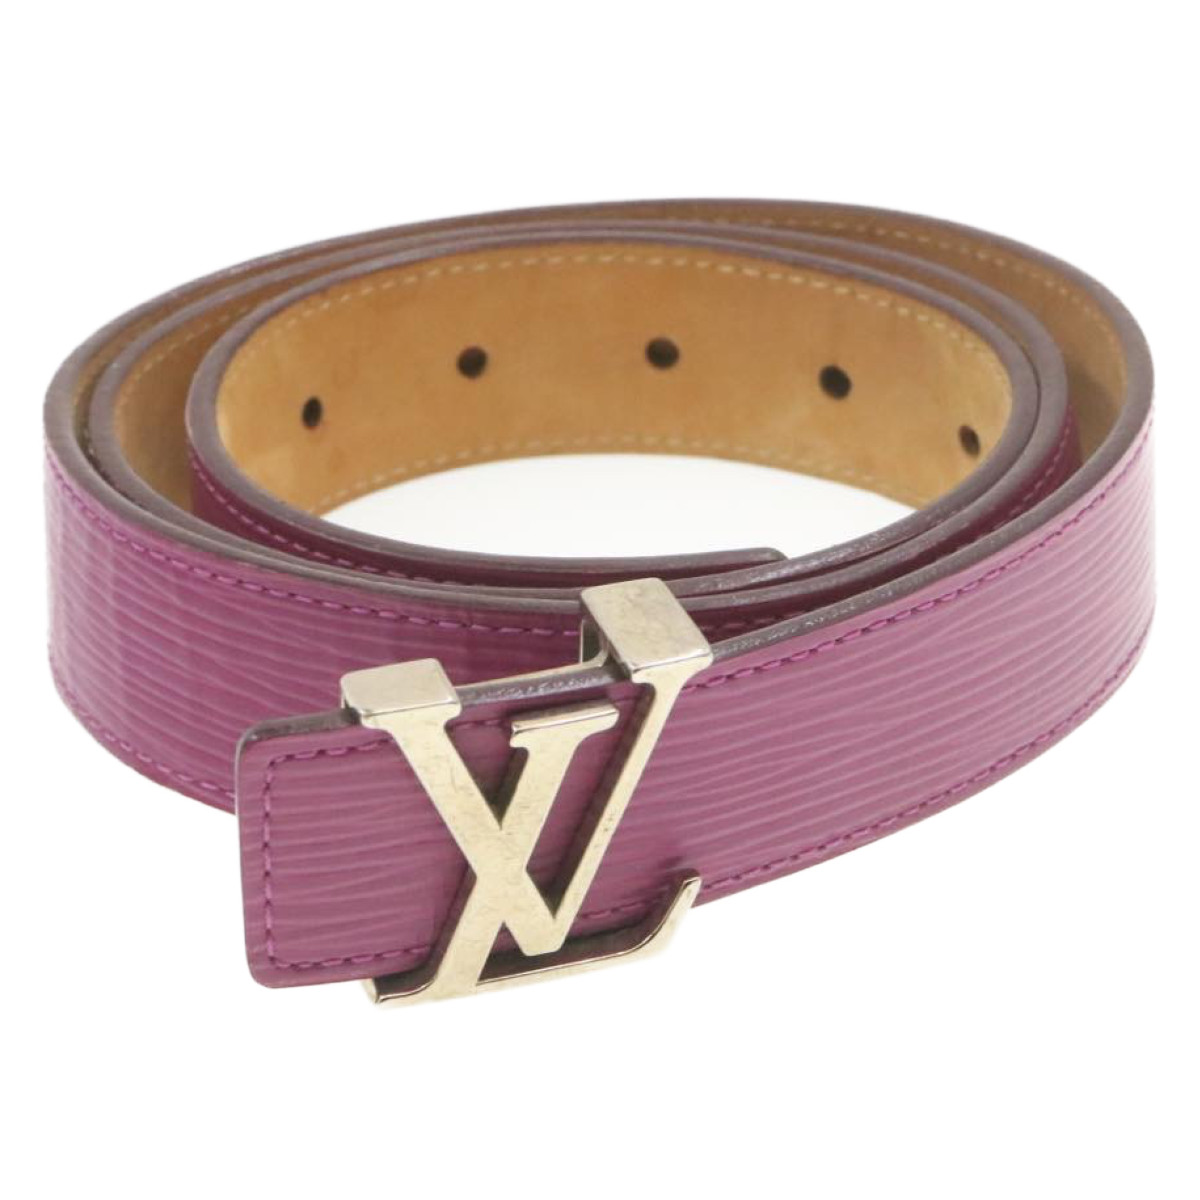 How To Get Rid Of Scratches On Louis Vuitton Belt